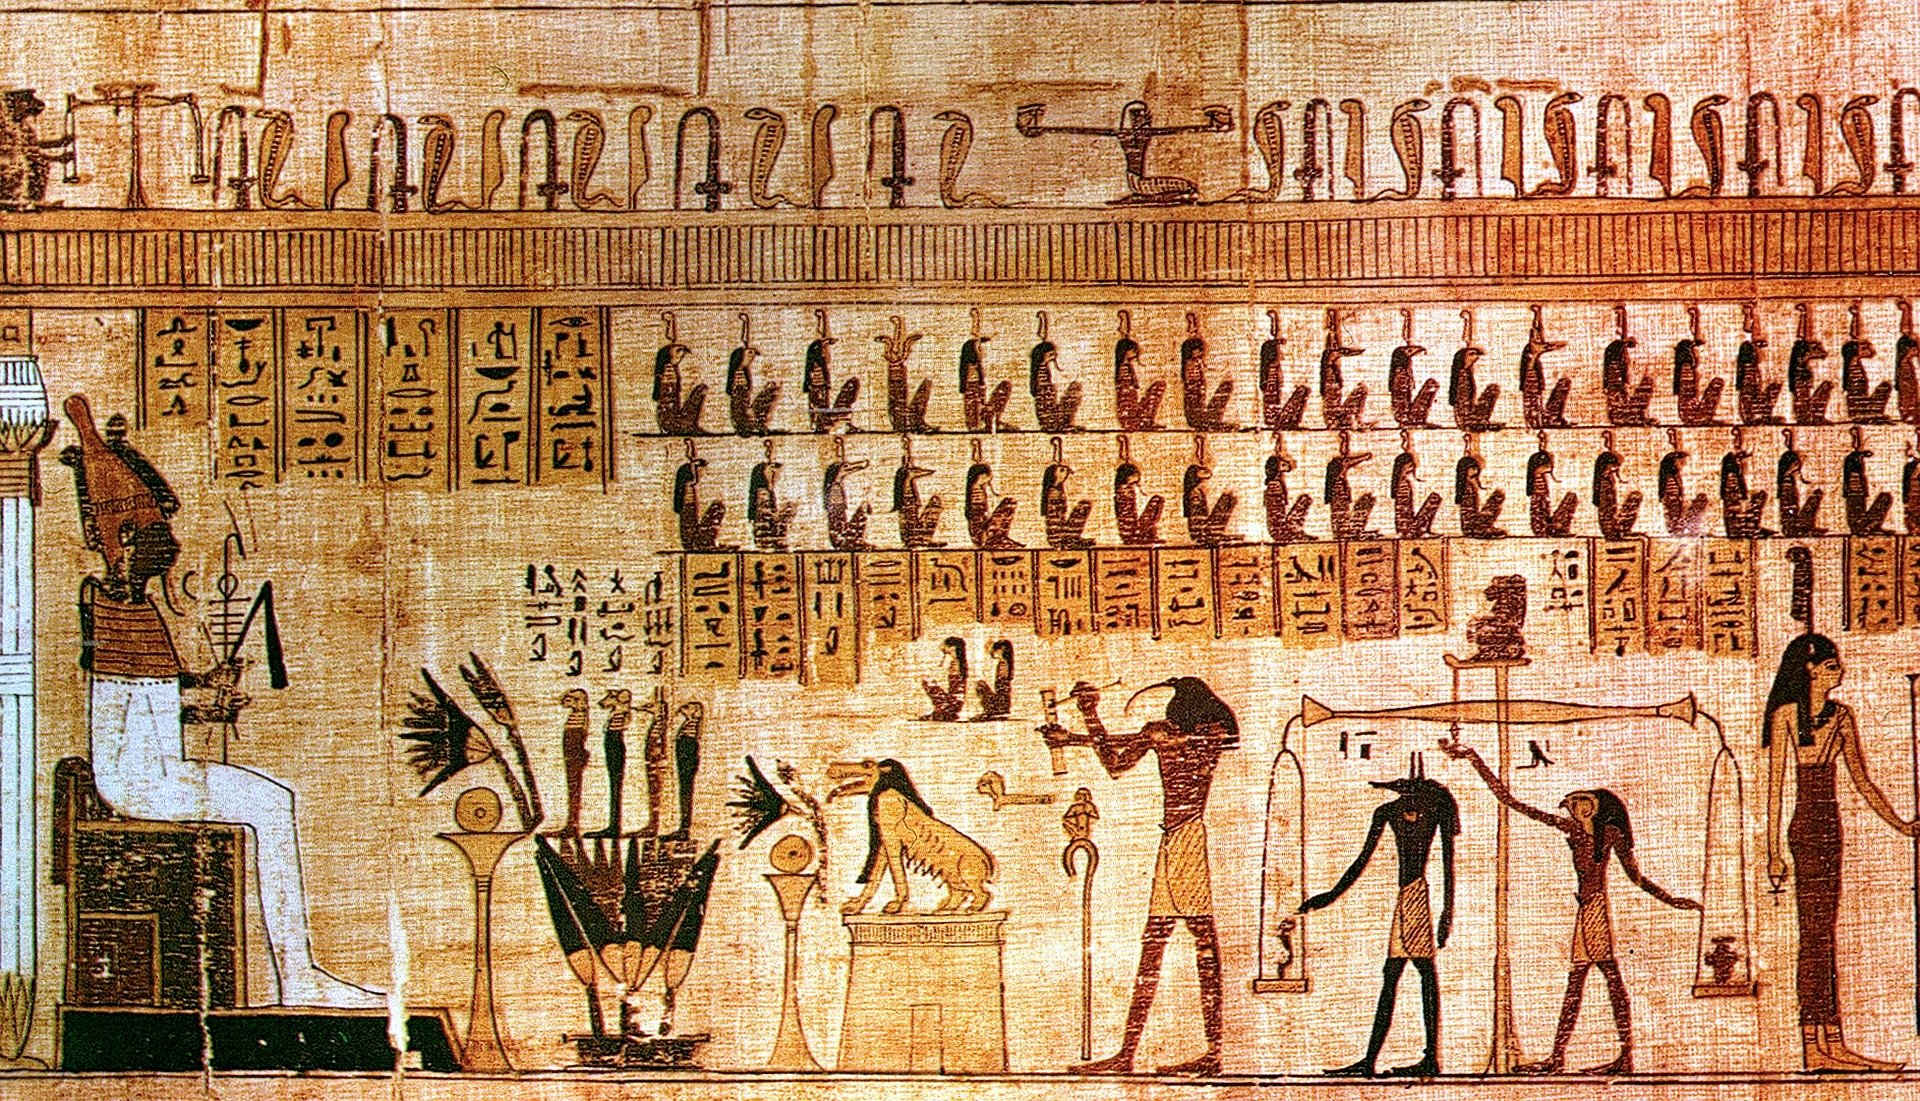 Was writing born in Egypt?